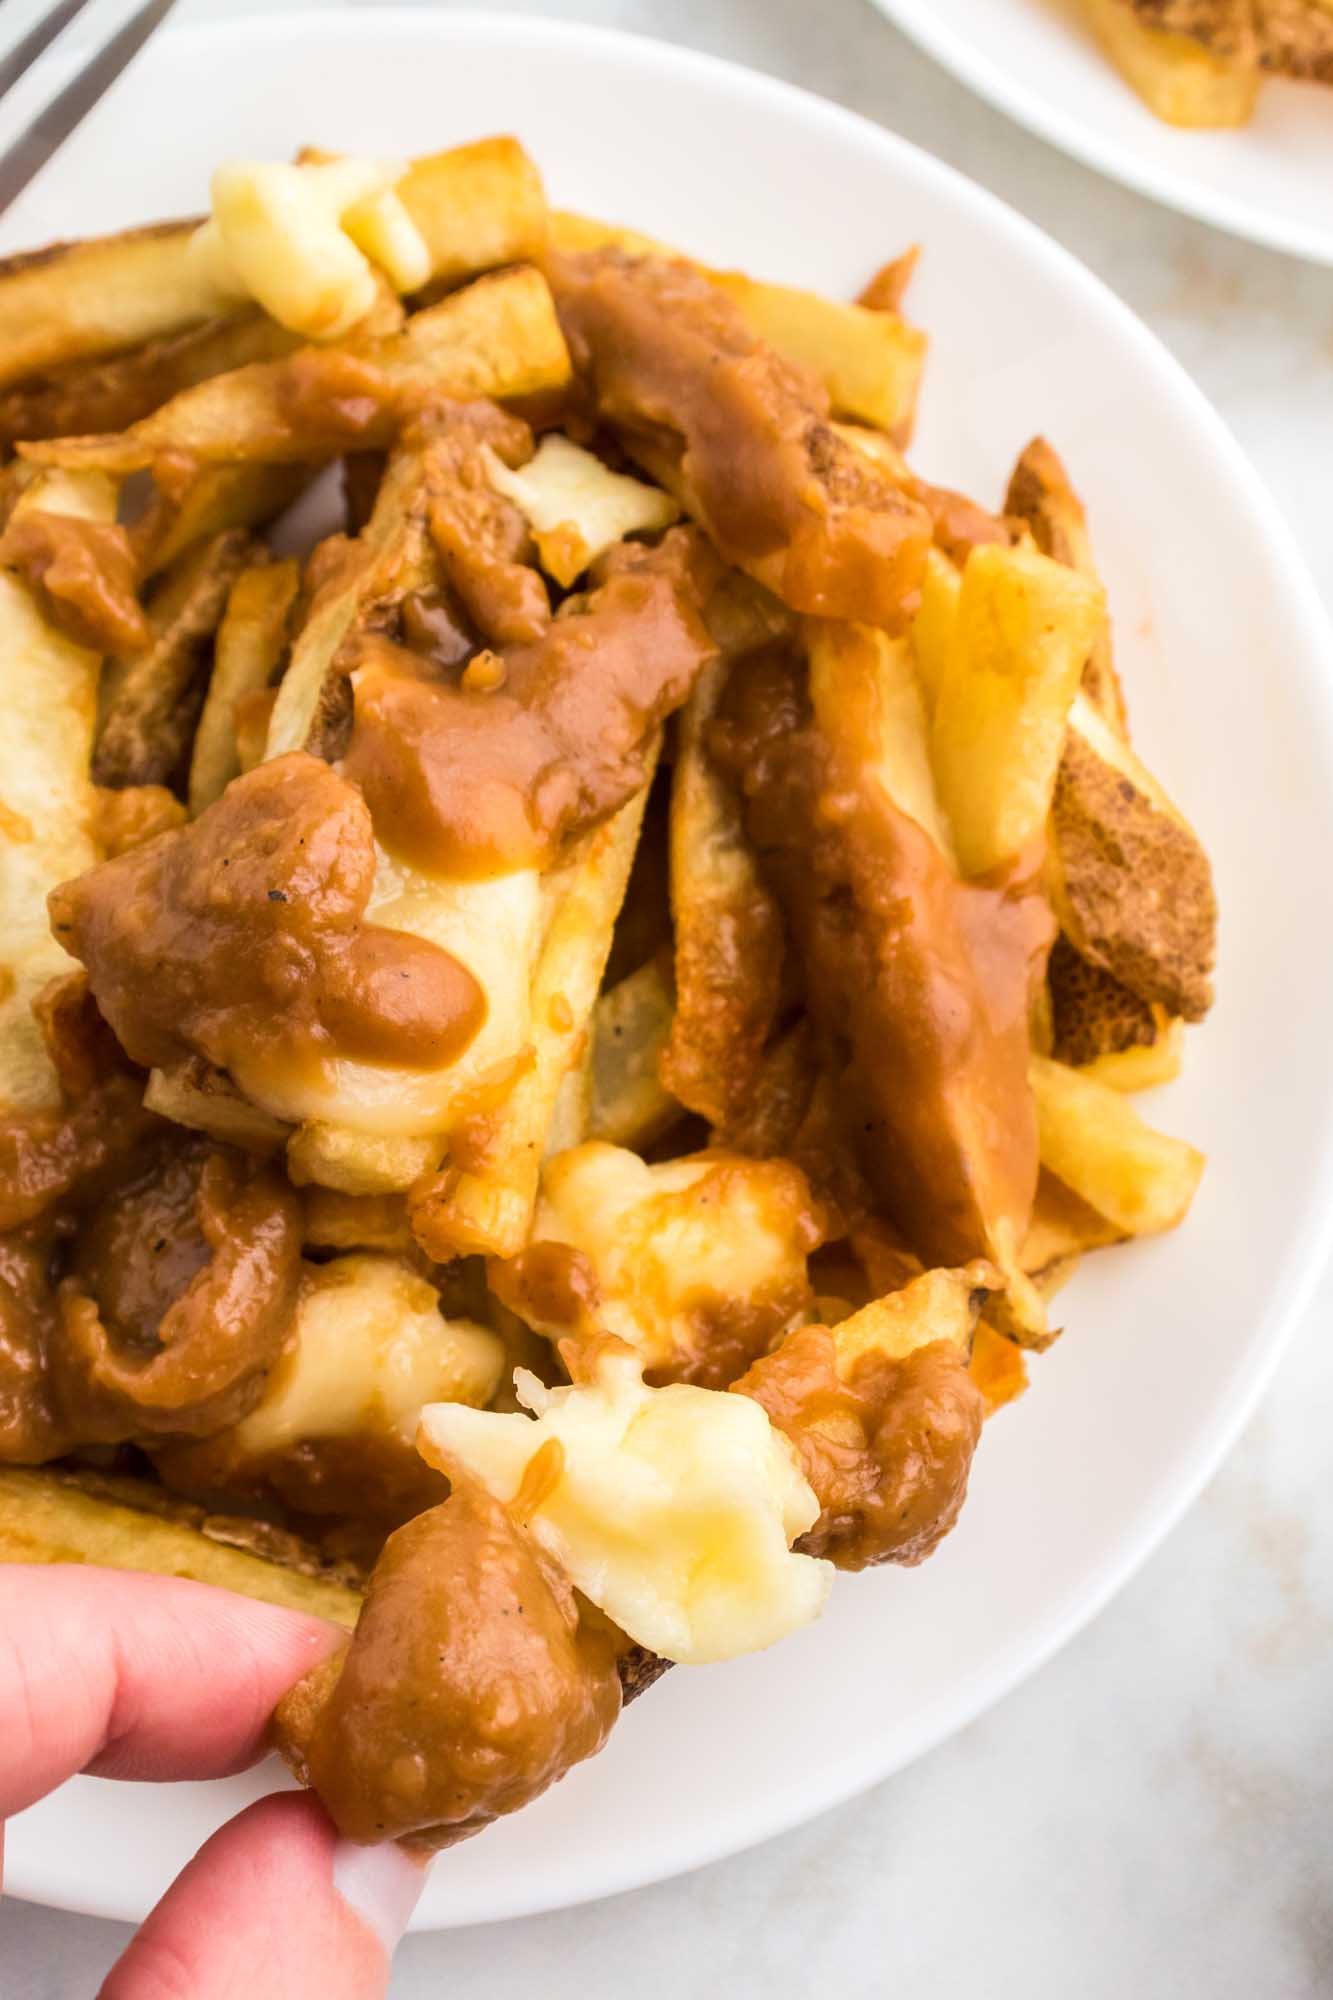 Taking a poutine fry with cheese and gravy from a plate